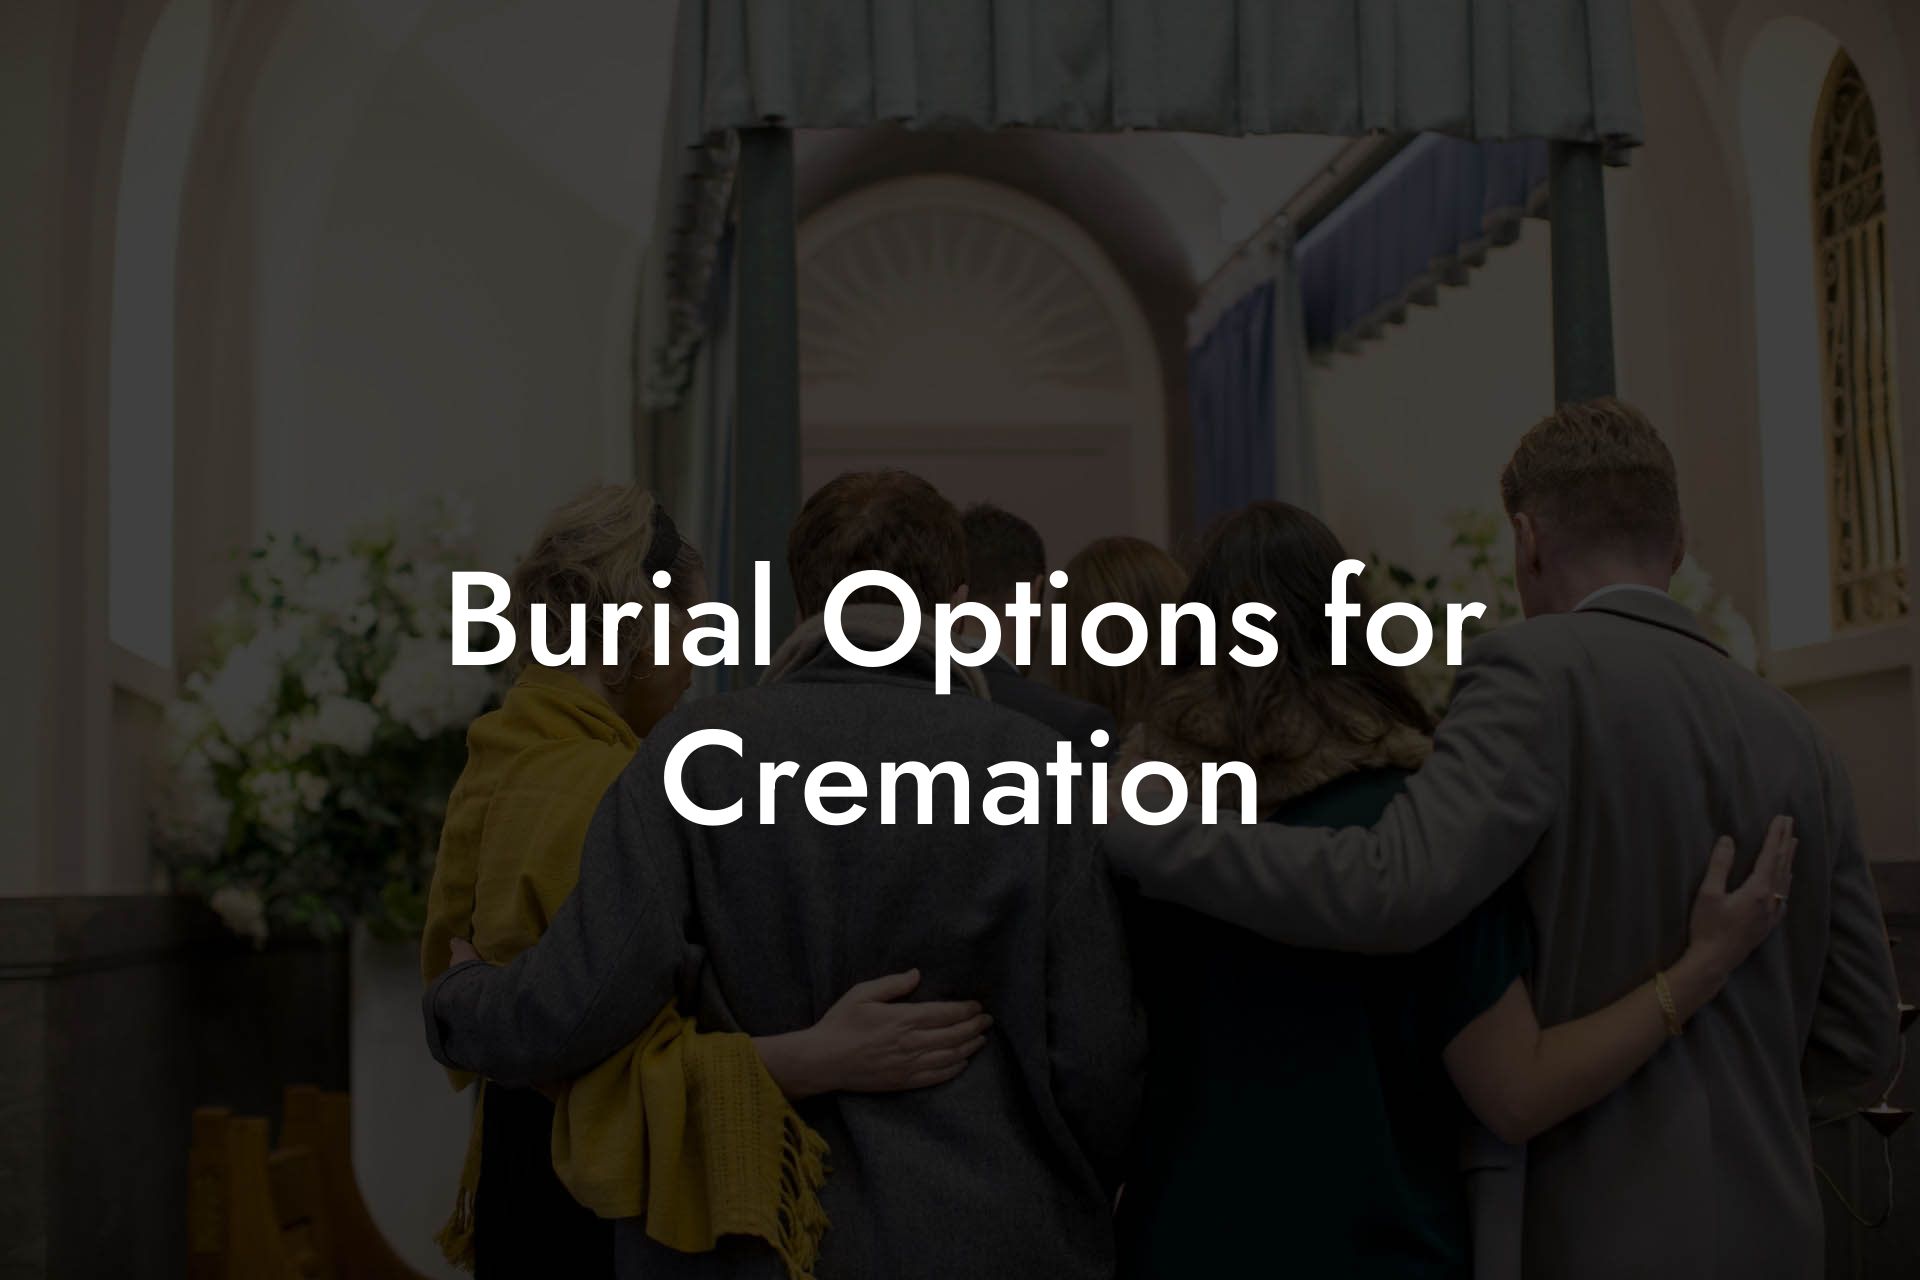 Burial Options for Cremation